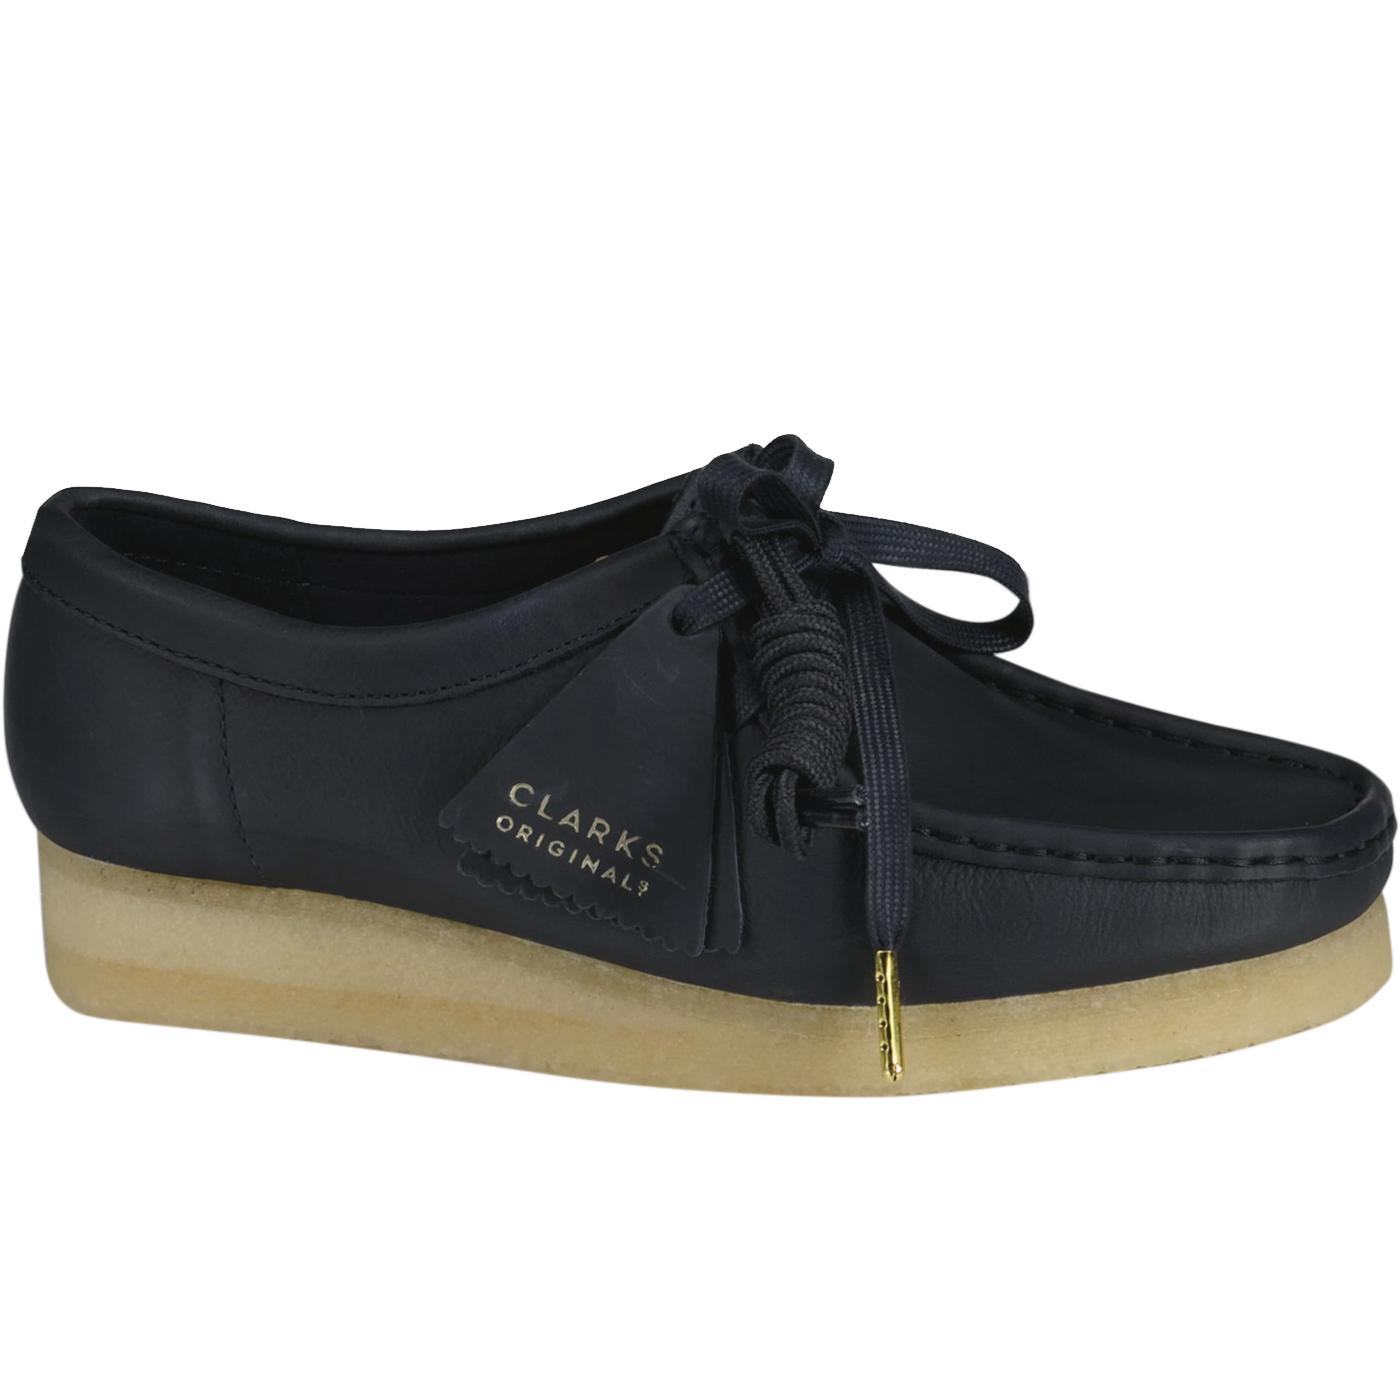 Wallabee CLARKS ORIGINALS Retro Leather Shoes in Navy